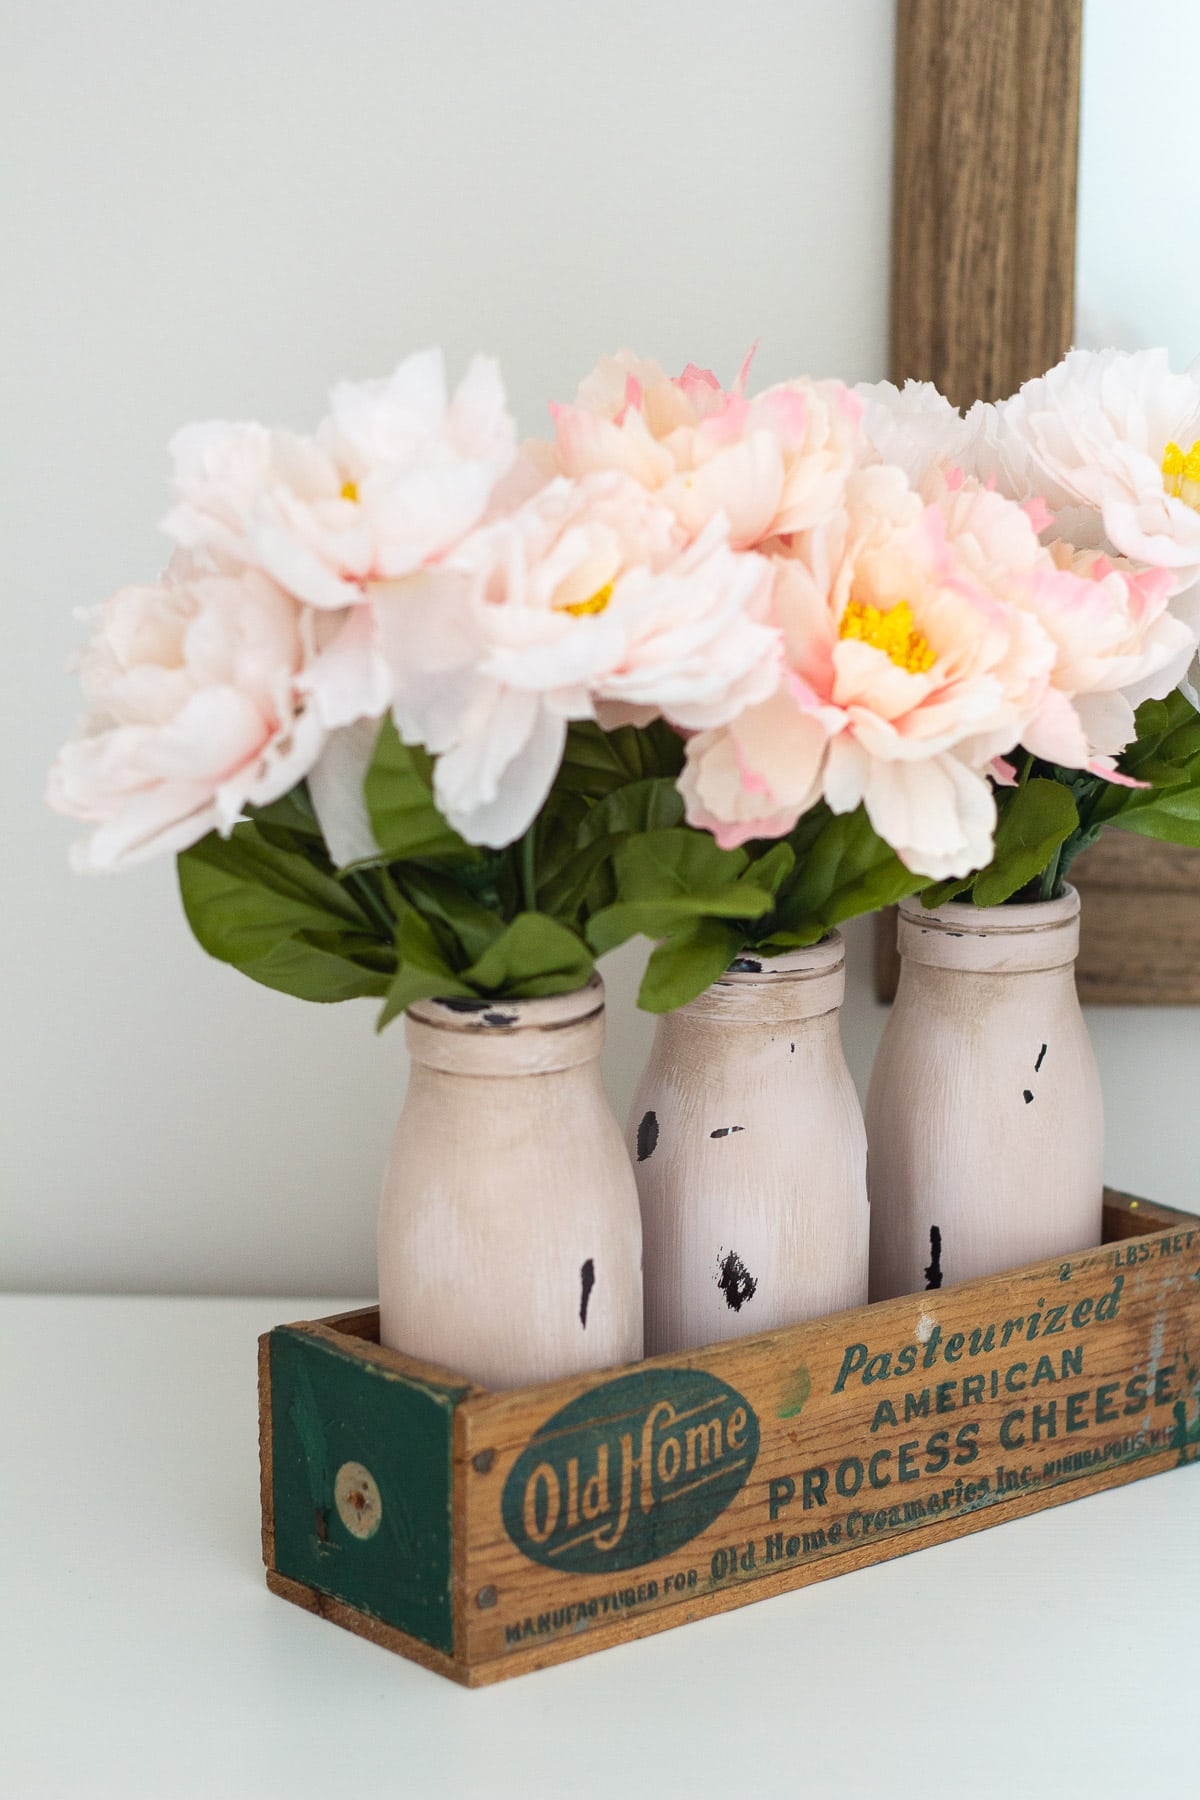 Chalk painted and distressed milk bottles in a vintage cheese box.